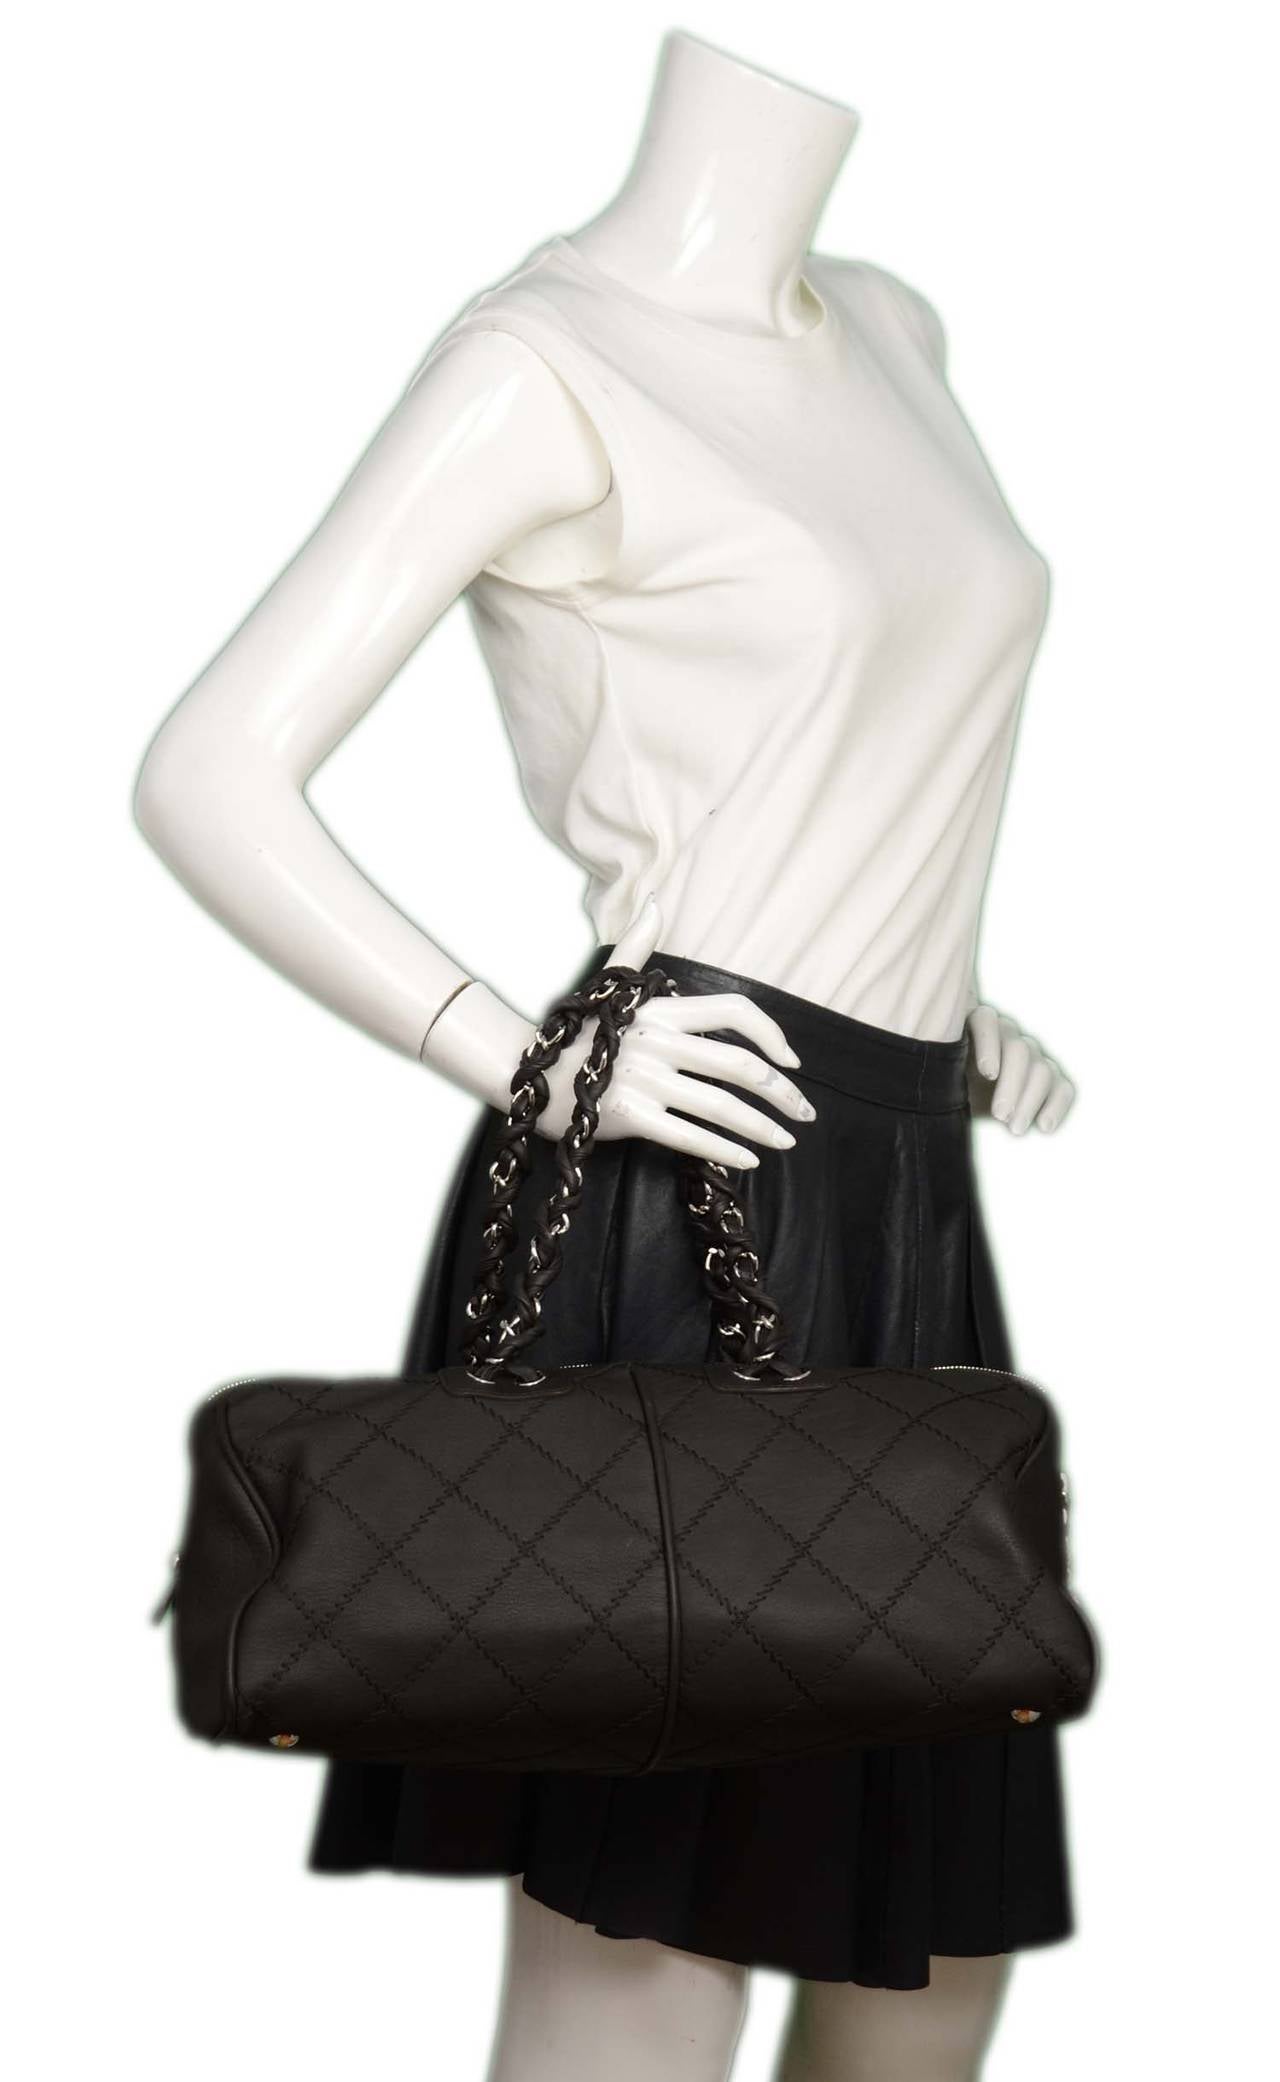 Chanel 2012 Dark Brown Quilted Leather Bowler Bag SHW rt. $5, 100 5